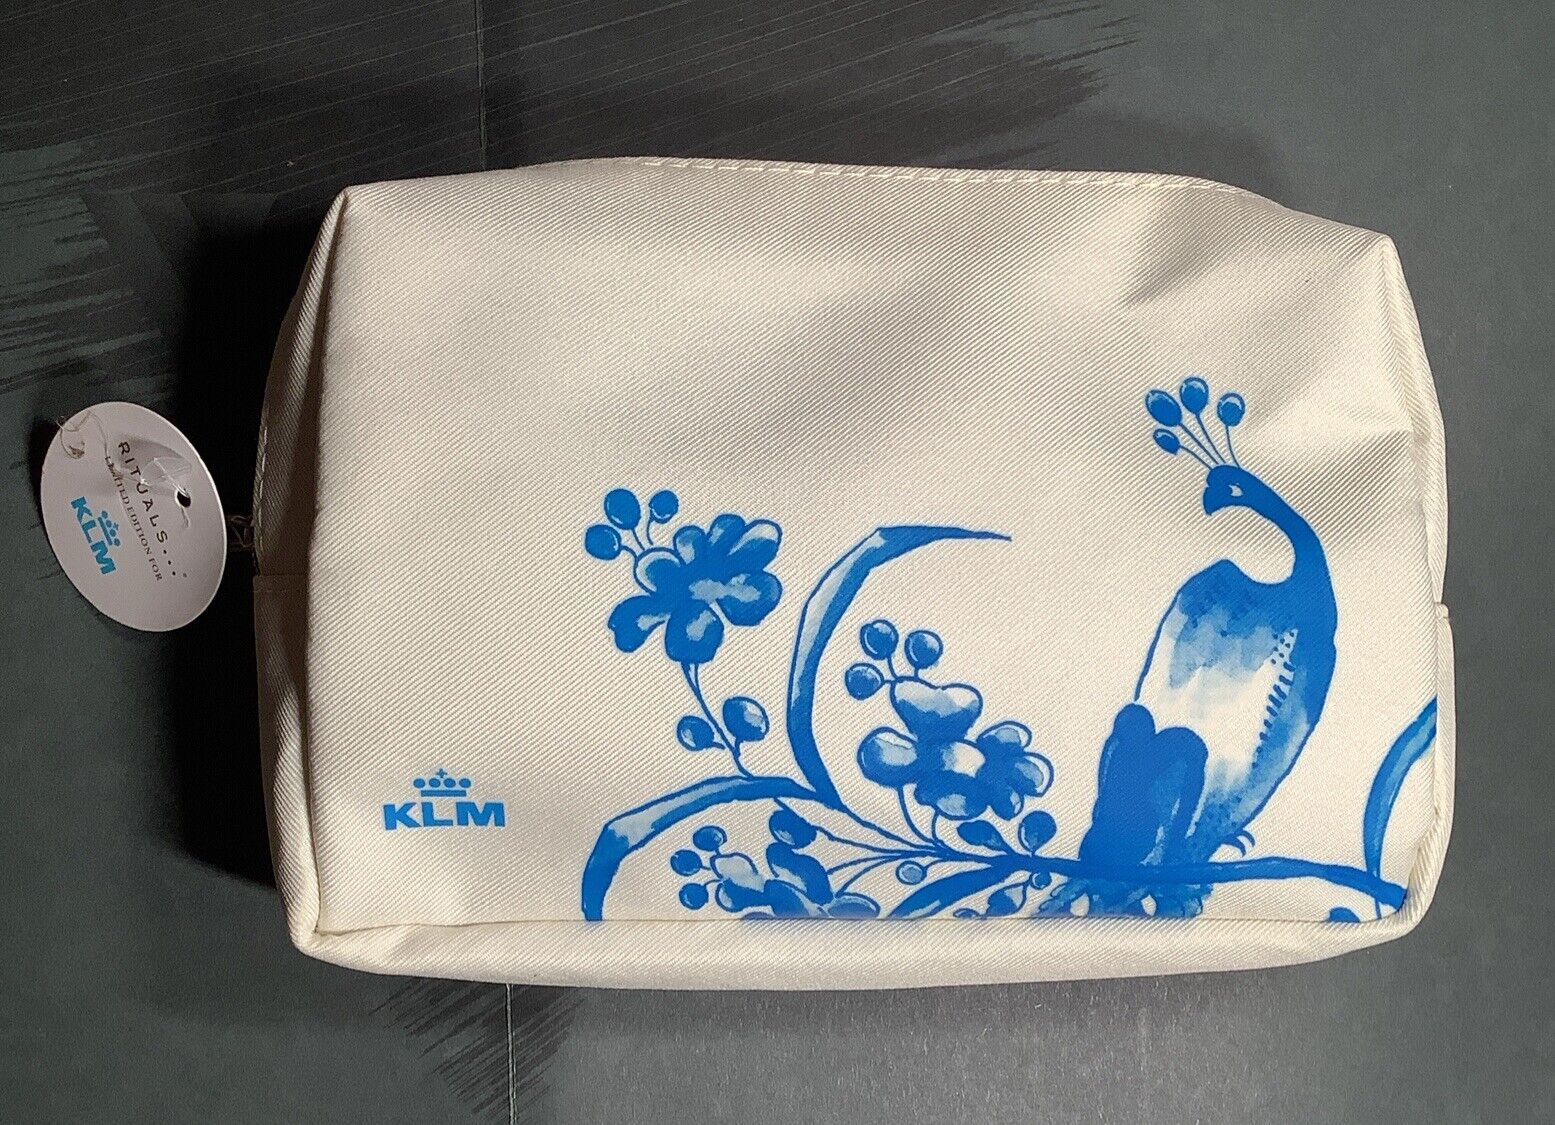 New KLM Amenity Kit Business Class Royal Dutch Airline White (SEALED) 2022